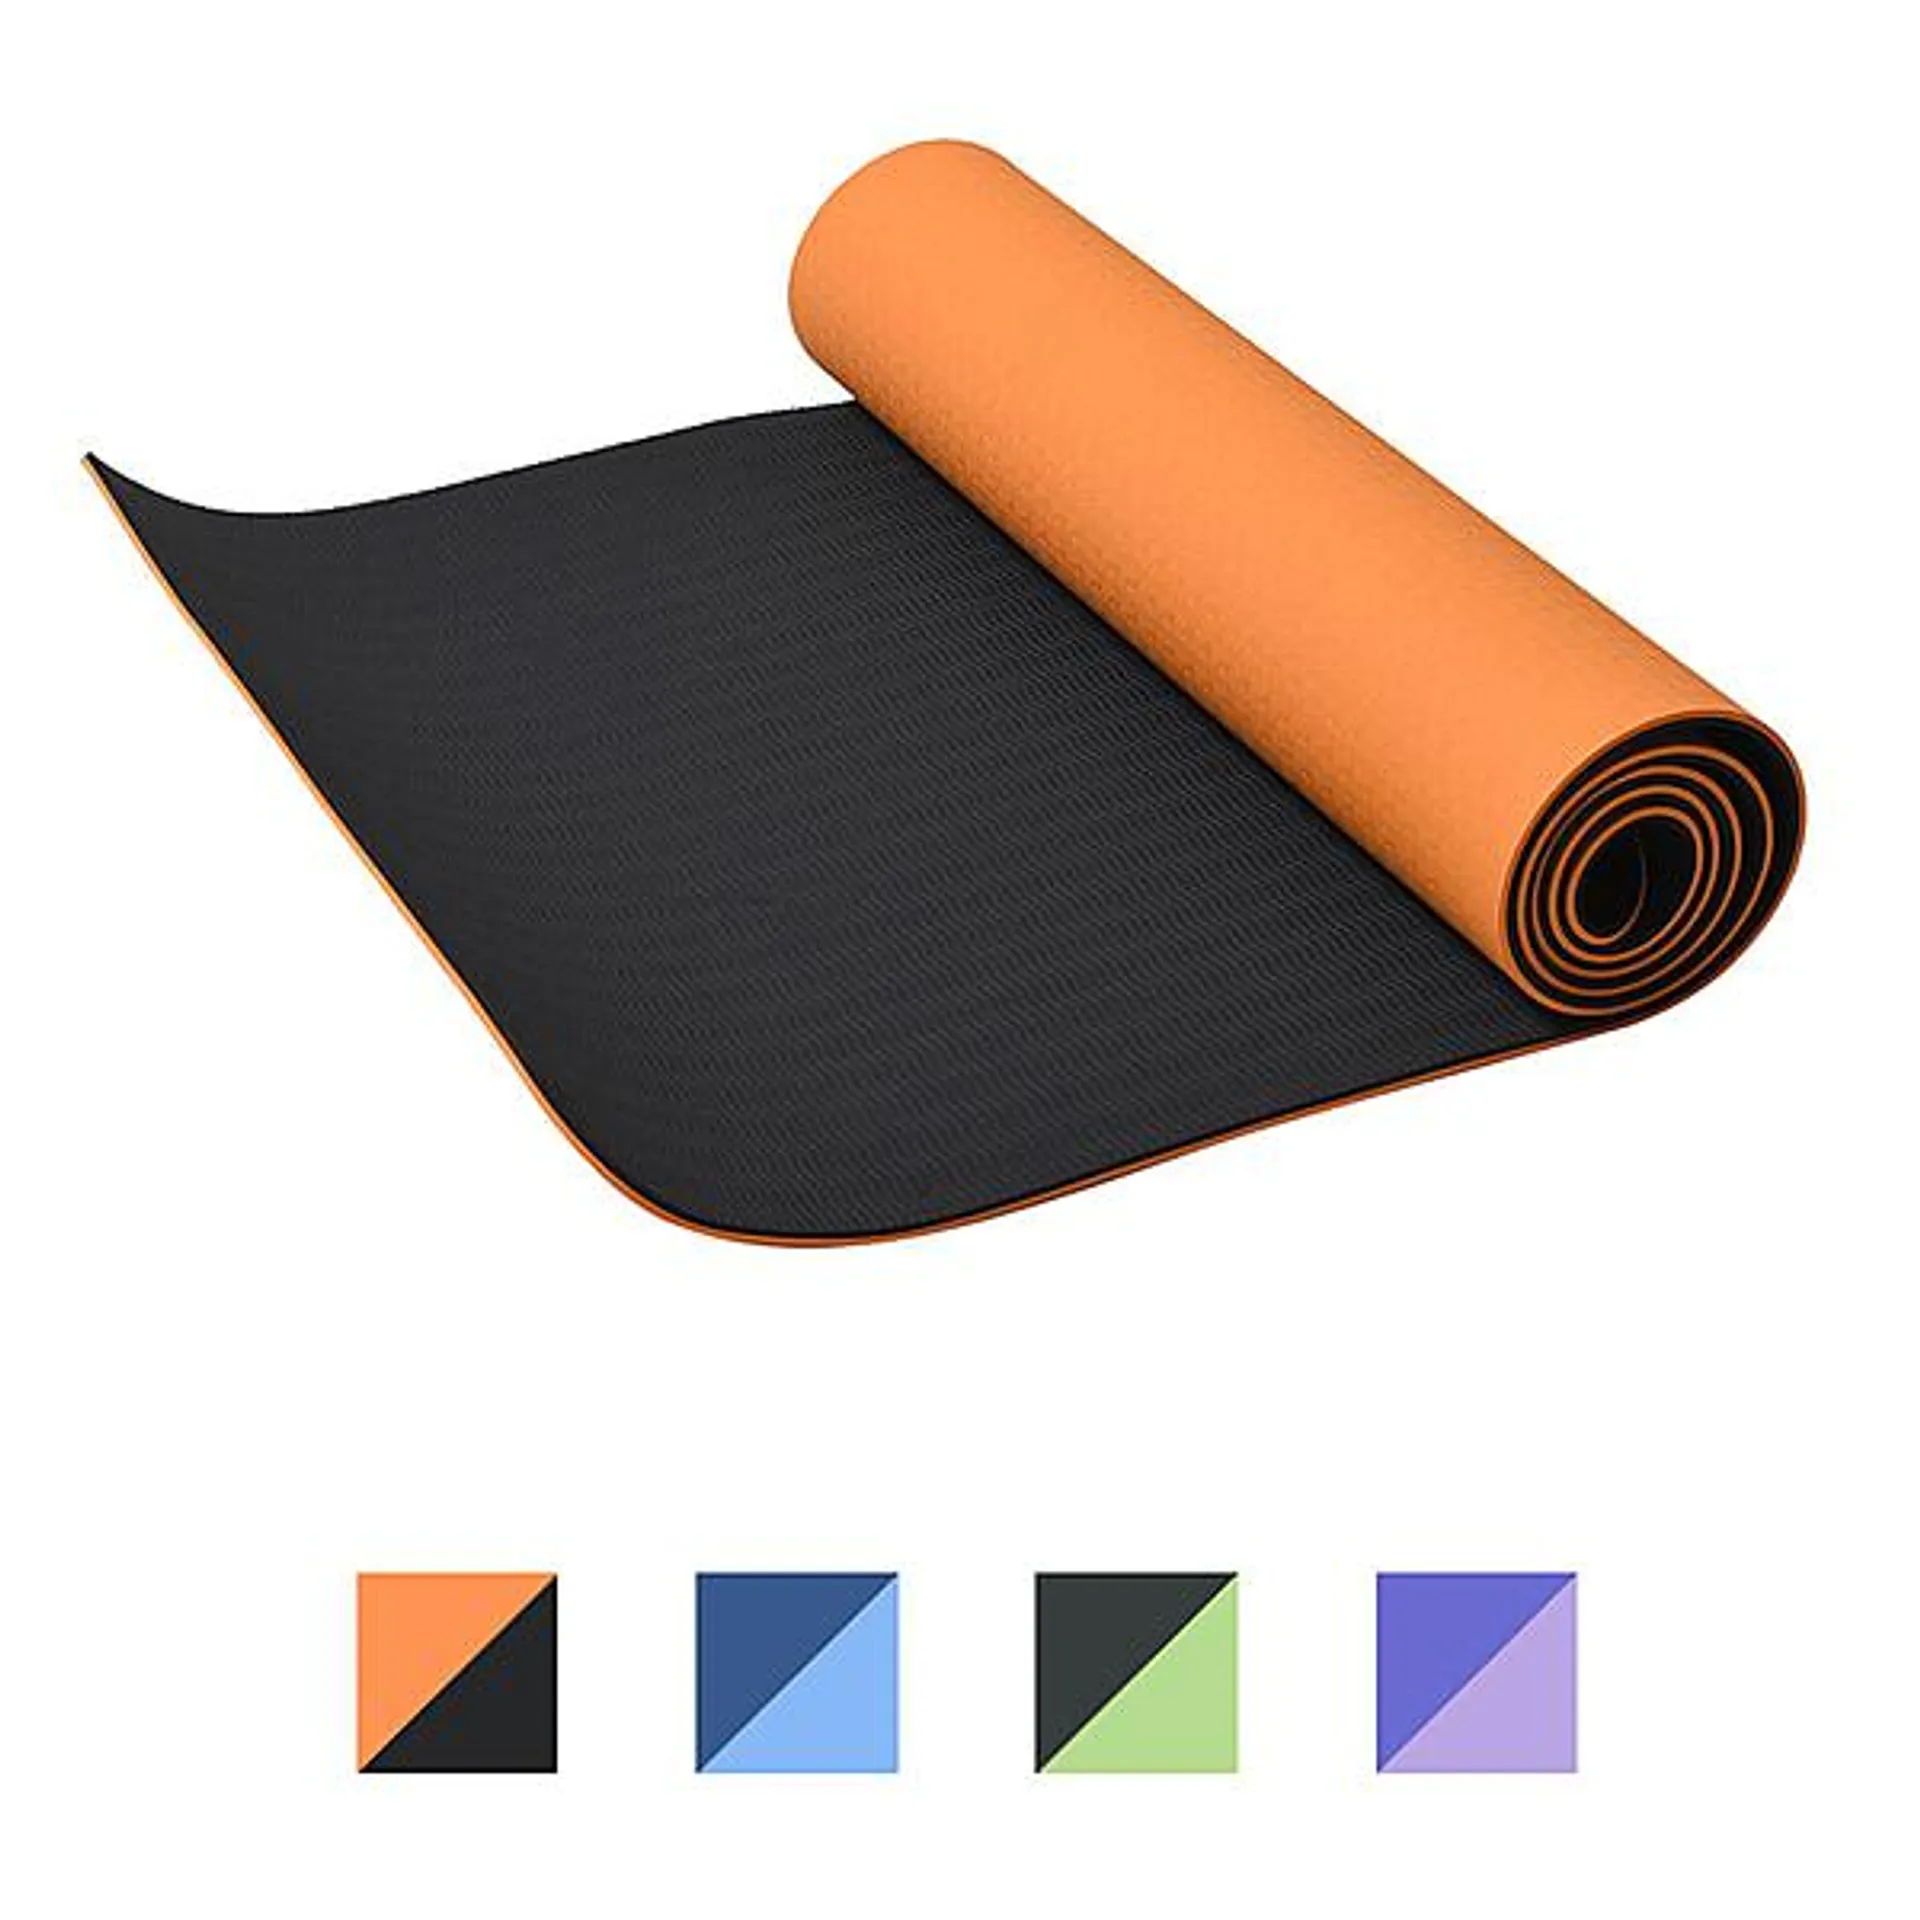 Eco-Friendly Non-Slip Fitness Yoga Mat with Carrying Strap - Orange